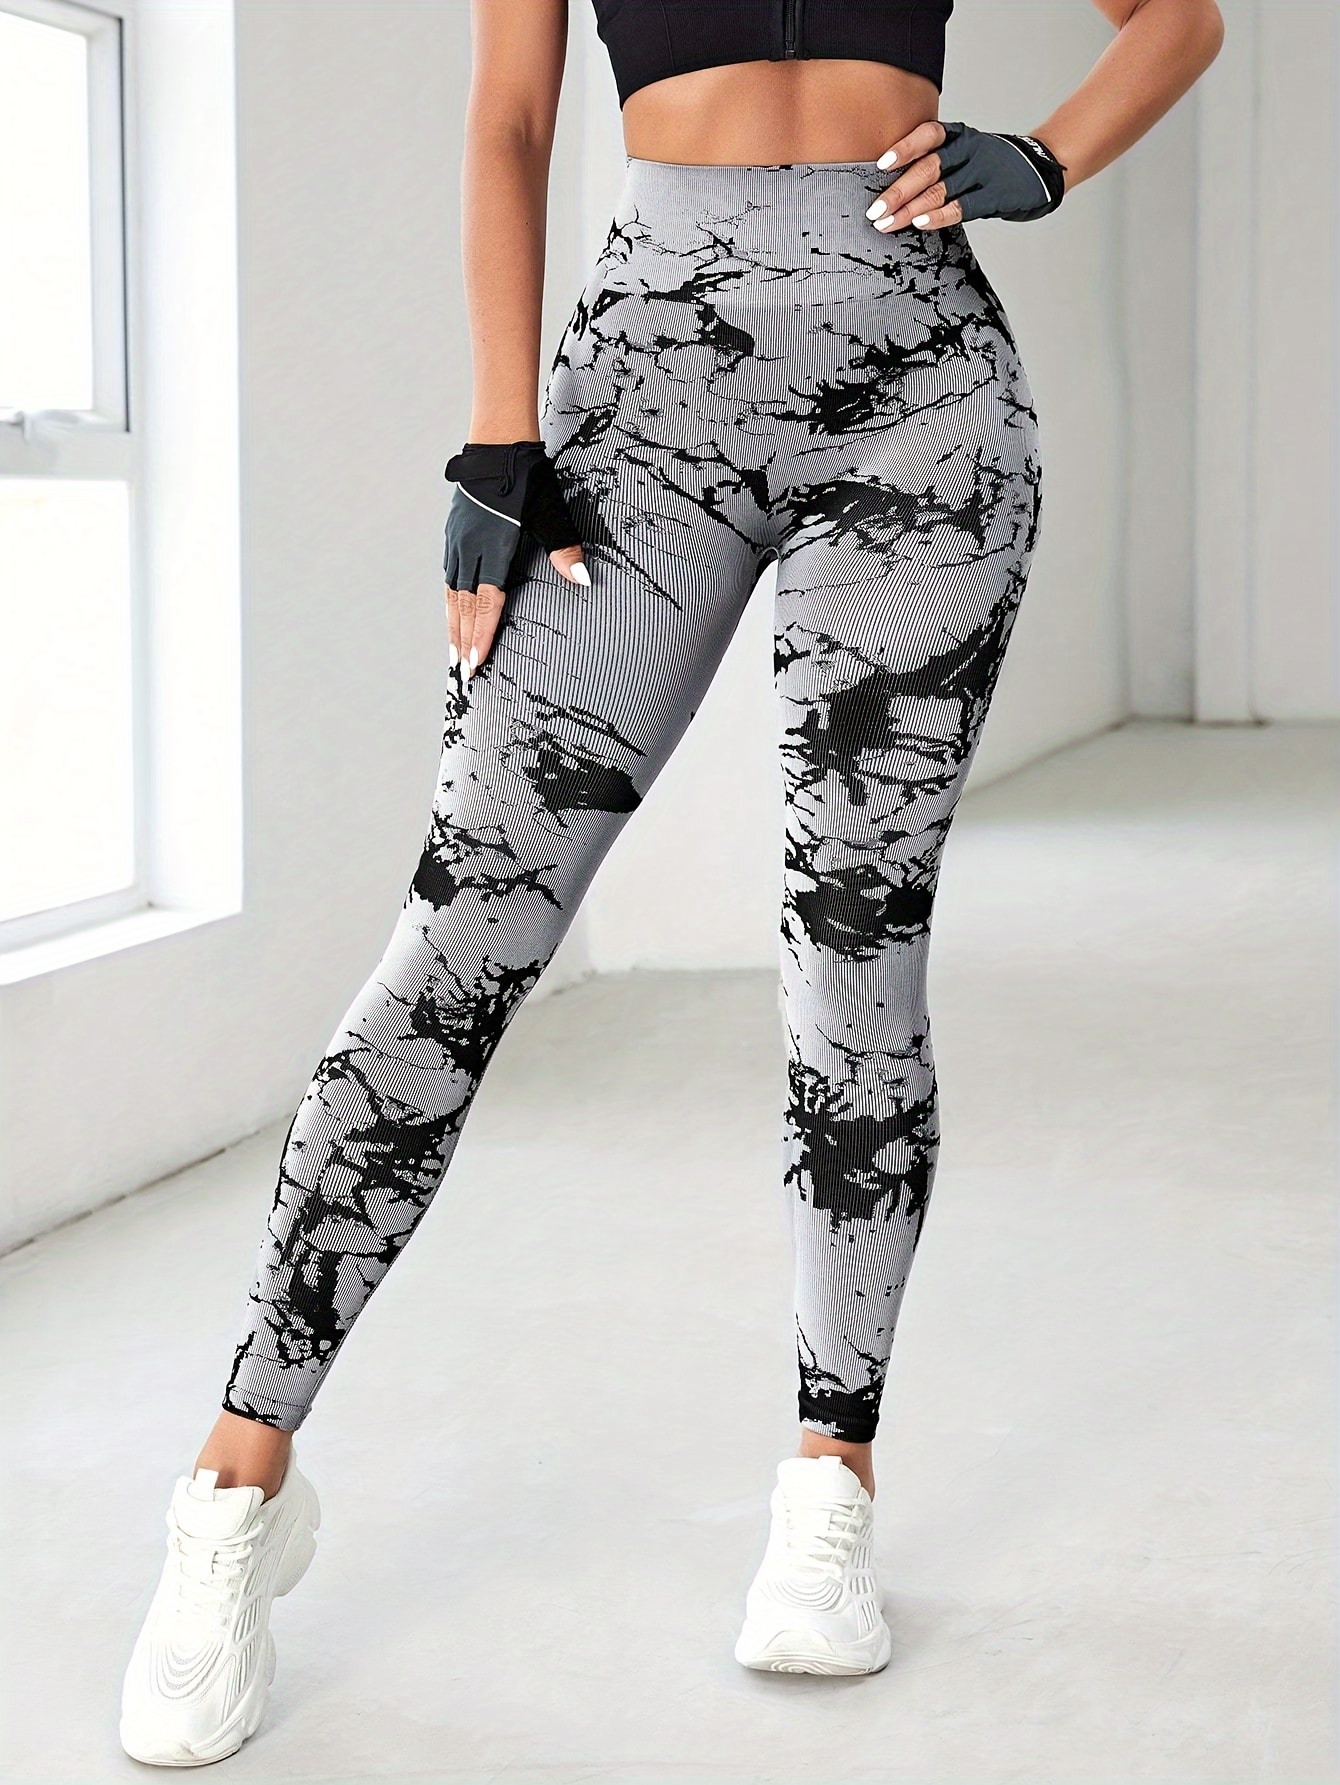 Tie Dye High Stretch Yoga Workout Pants, Fitness Running Sports Leggings,  Women's Activewear